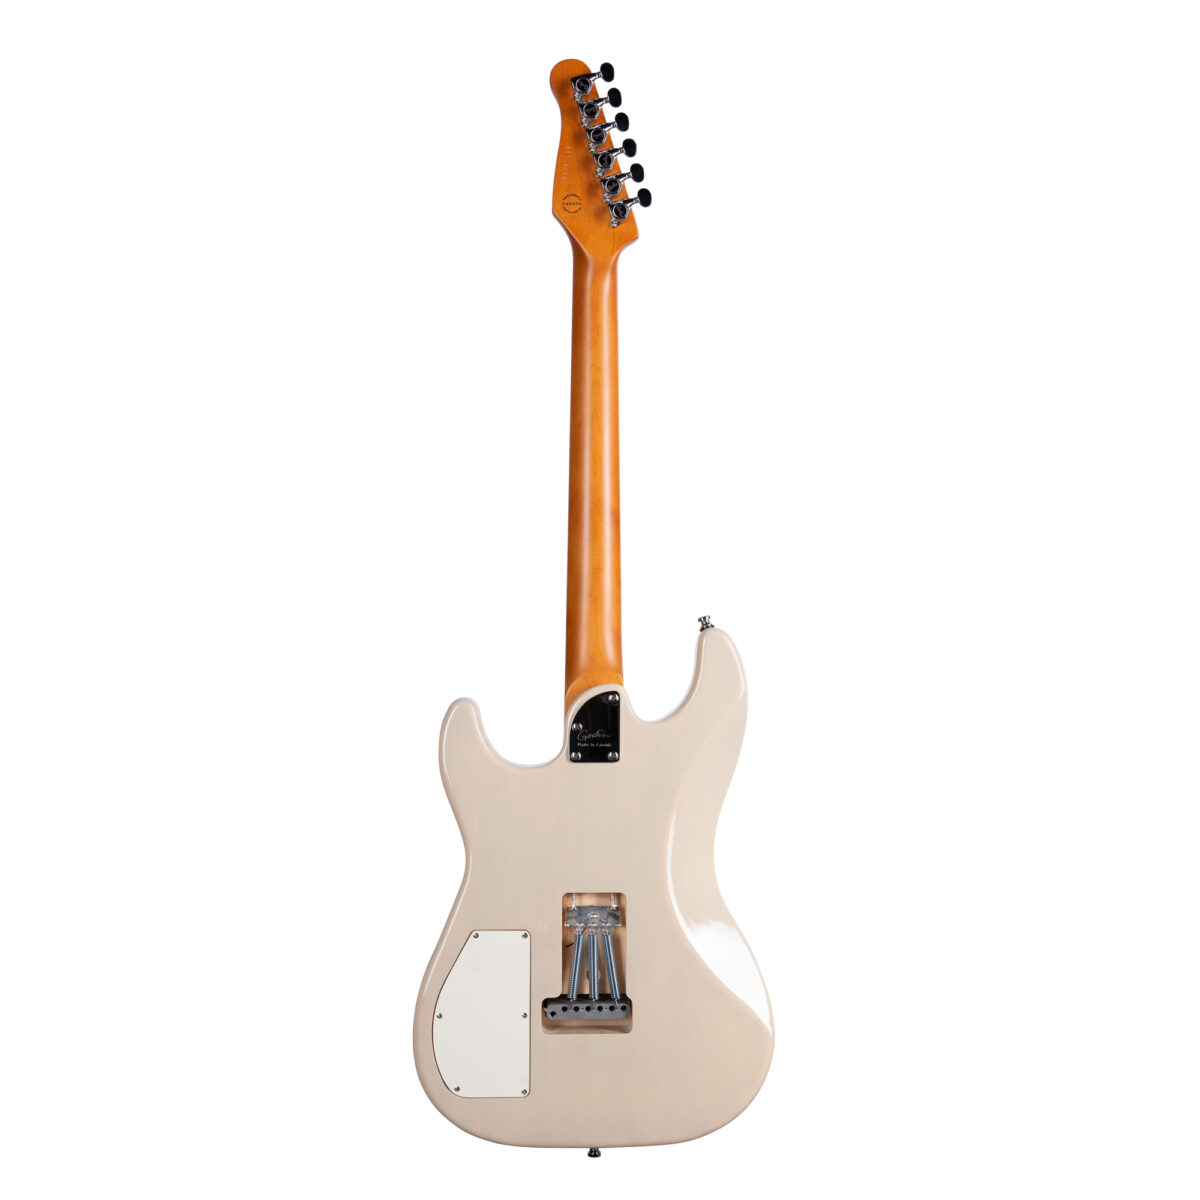 Godin Session T-Pro Electric Guitar - Ozark Cream with Rosewood Fingerboard